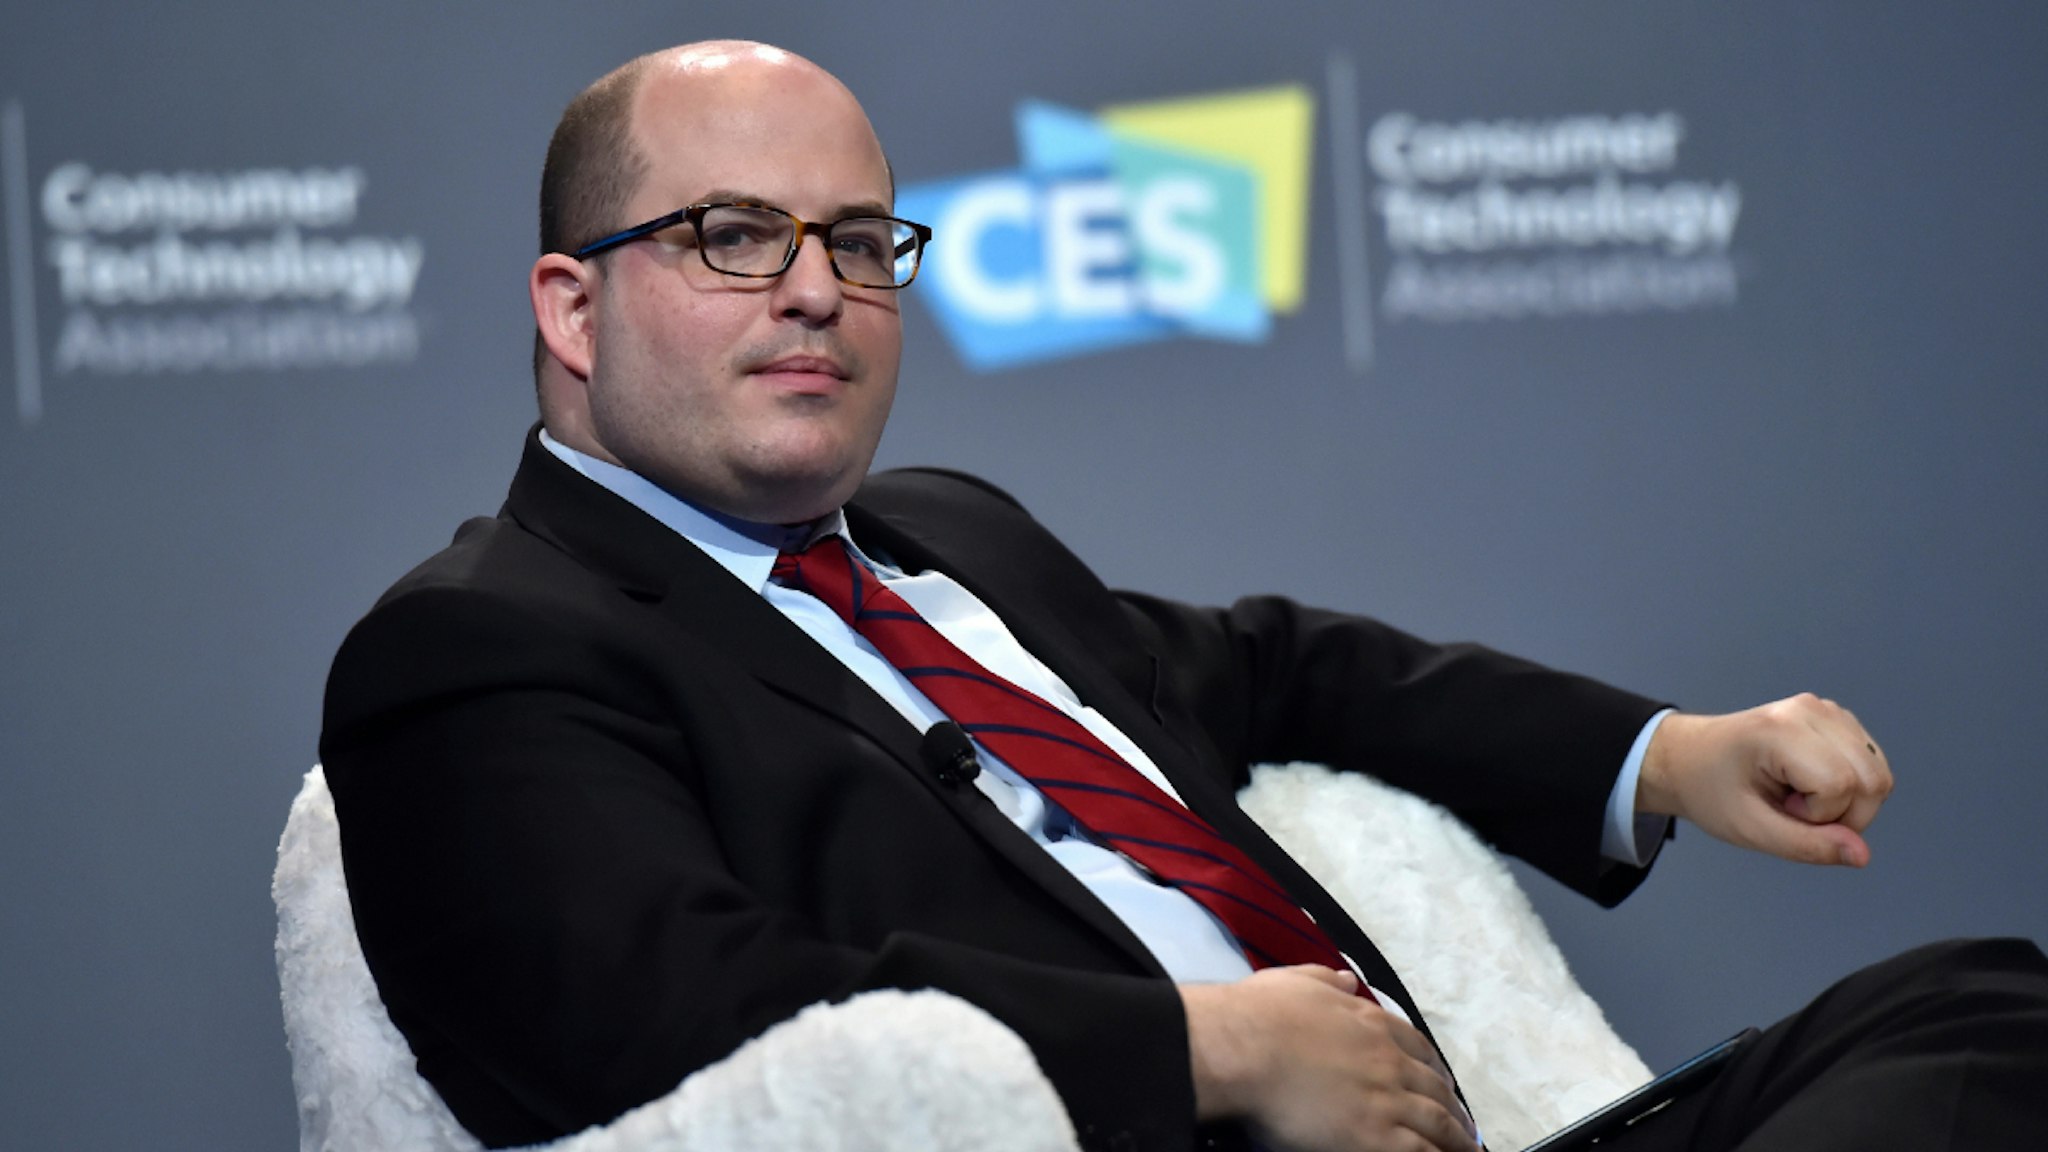 LAS VEGAS, NEVADA - JANUARY 09: CNN anchor and correspondent Brian Stelter speaks during a press event at CES 2019 at the Aria Resort & Casino on January 9, 2019 in Las Vegas, Nevada. CES, the world's largest annual consumer technology trade show, runs through January 11 and features about 4,500 exhibitors showing off their latest products and services to more than 180,000 attendees.